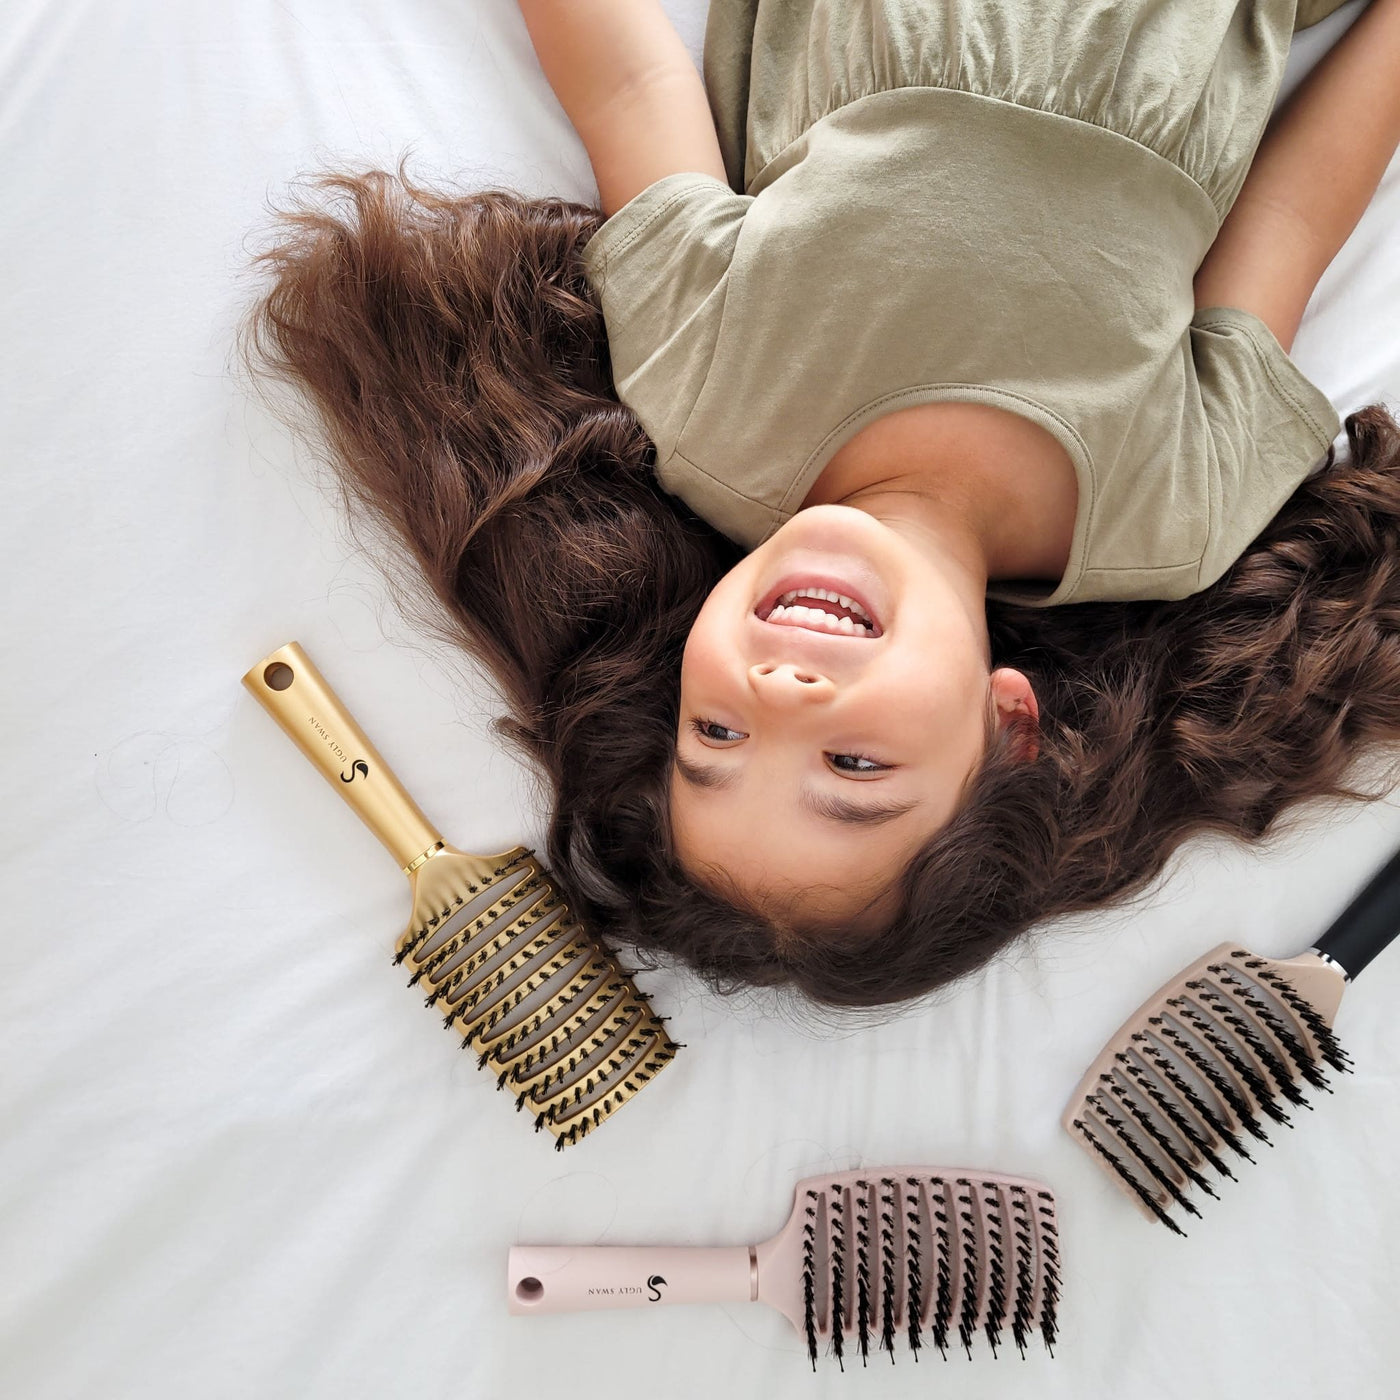 Boar Bristle Hair Brush and Comb Set for Women Men Kids, Best Natural  Wooden Paddle Hairbrush and Small Travel Styling Brush for Wet or Dry Hair  - Walmart.com